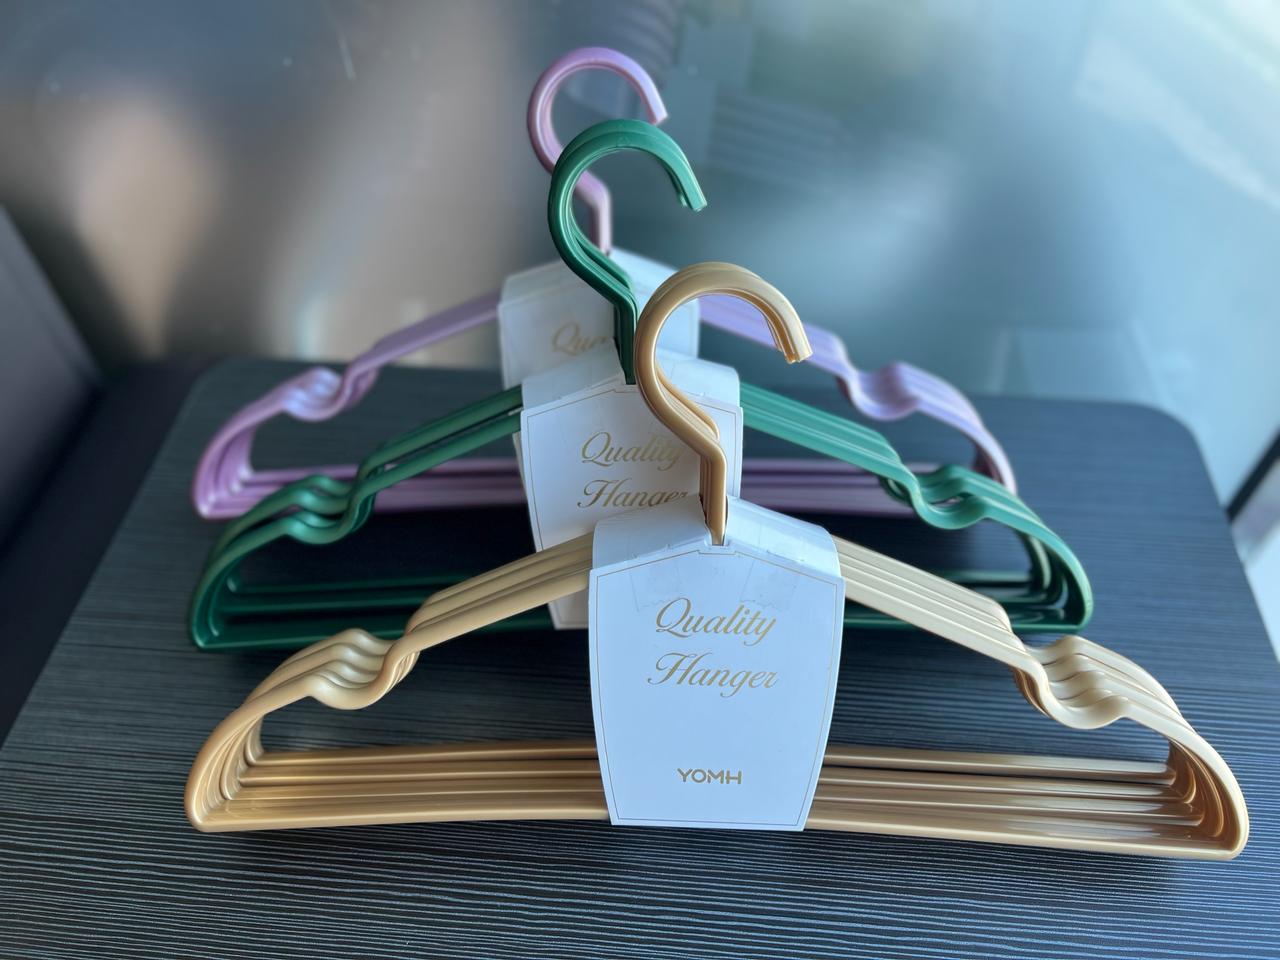 Sleek Plastic Hangers in Gold, Rose, and Emerald - 5-Pack for Closet Efficiency - 0